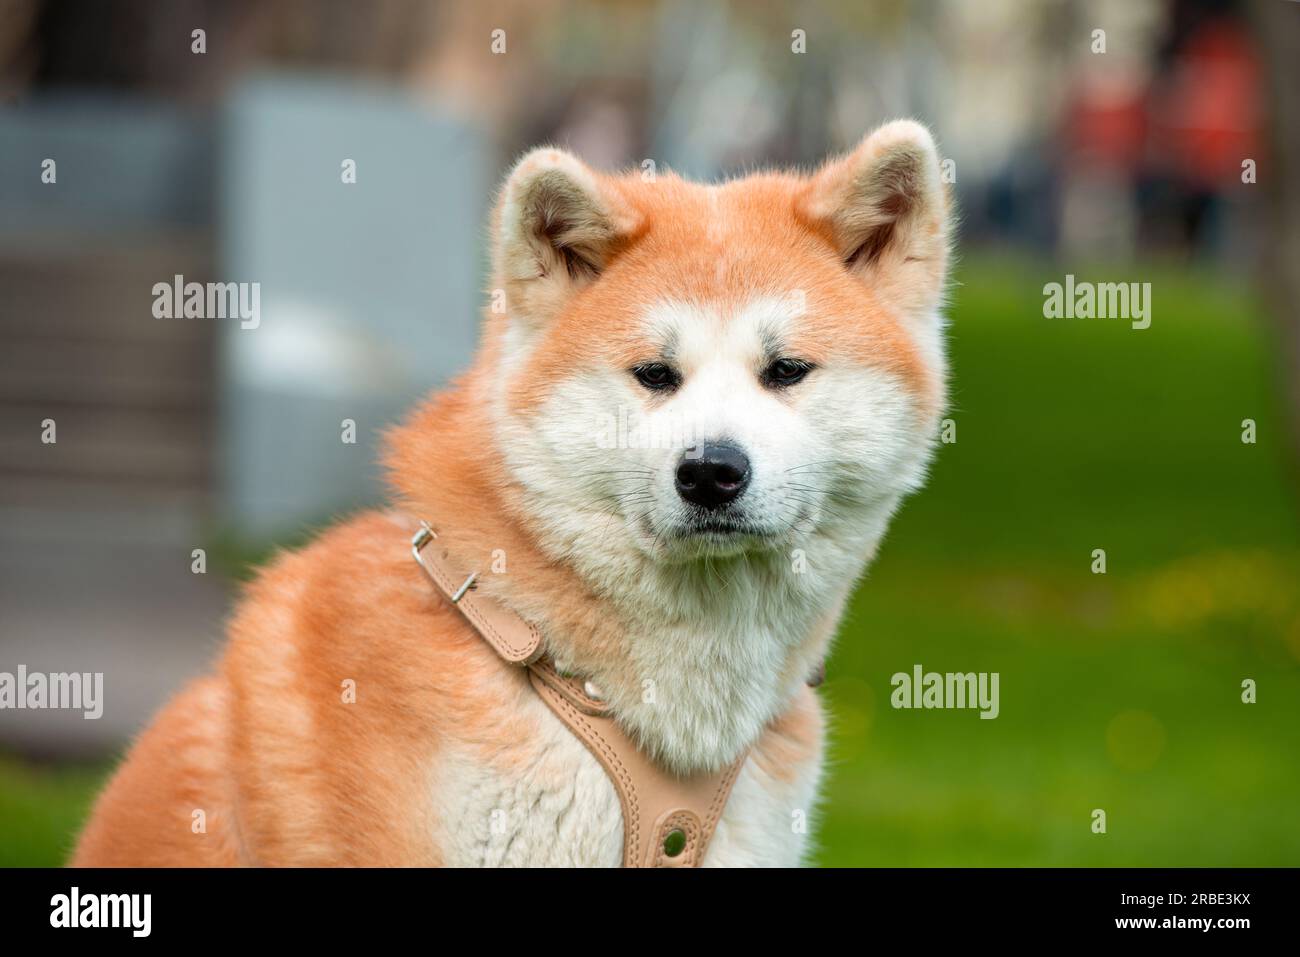 Adult Akita Inu dog in a city public park in Japan Stock Photo